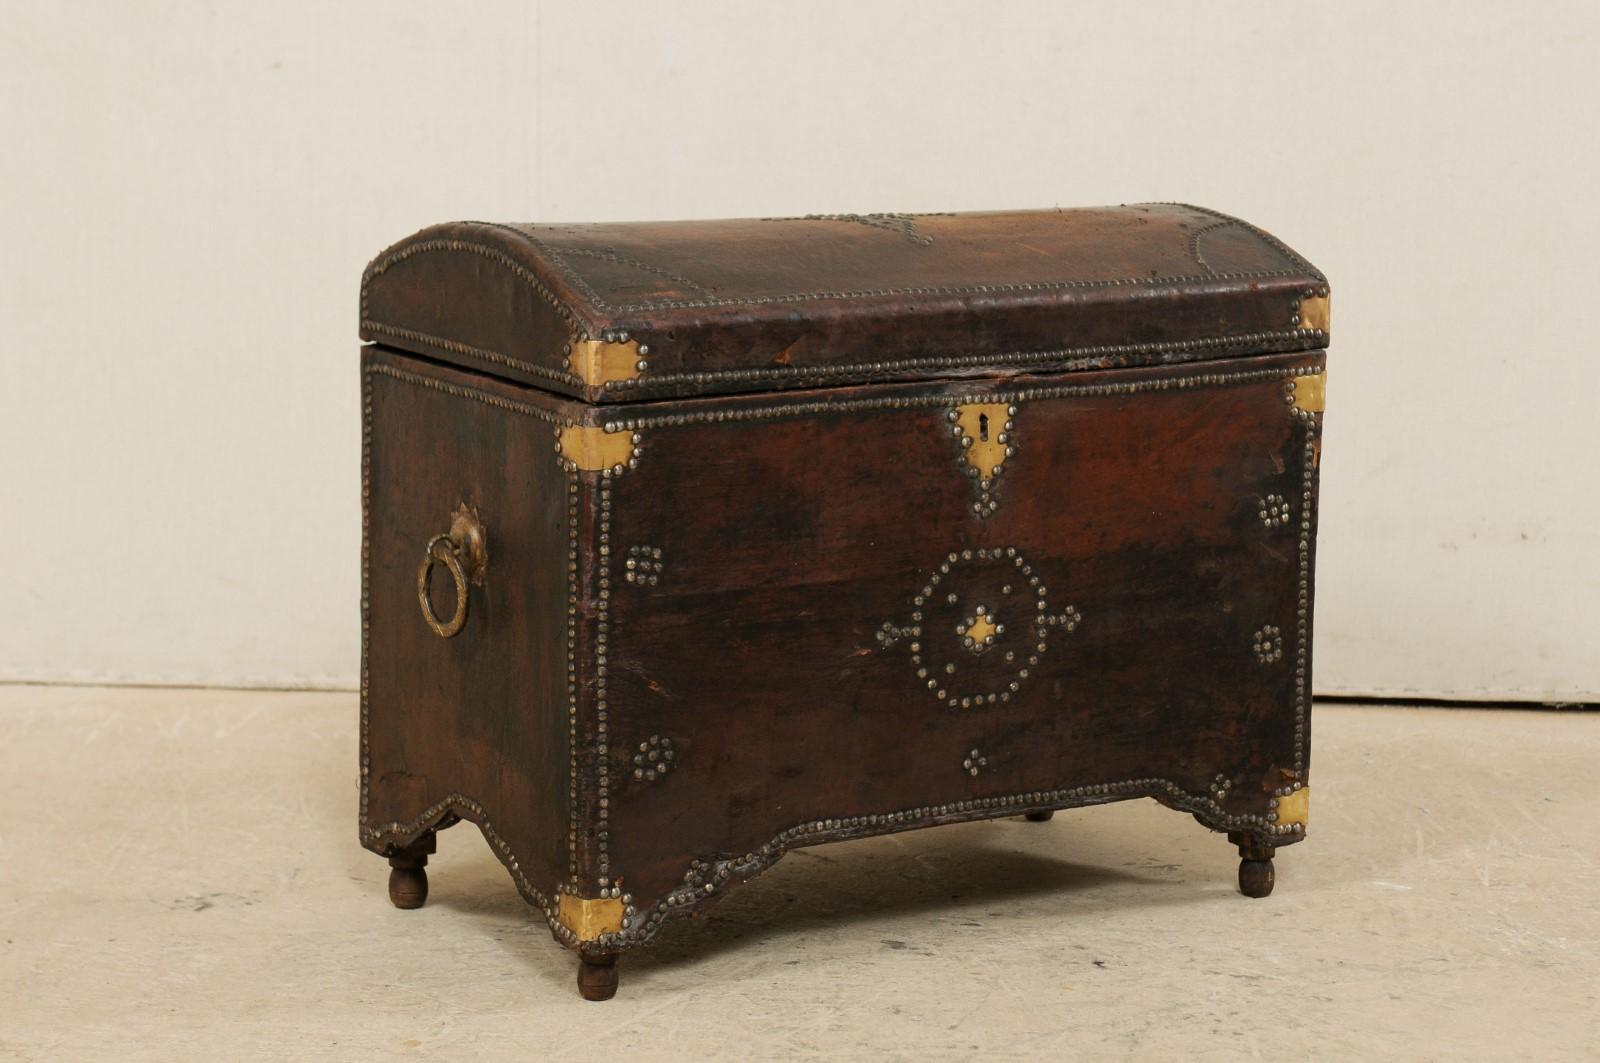 A Spanish leather wrapped wood trunk with brass and nail-head accents from the 19th century. This antique coffer from Spain has a rectangular-shape with domed top. The body and top are decorated with studs, creating floral and star shapes, and a